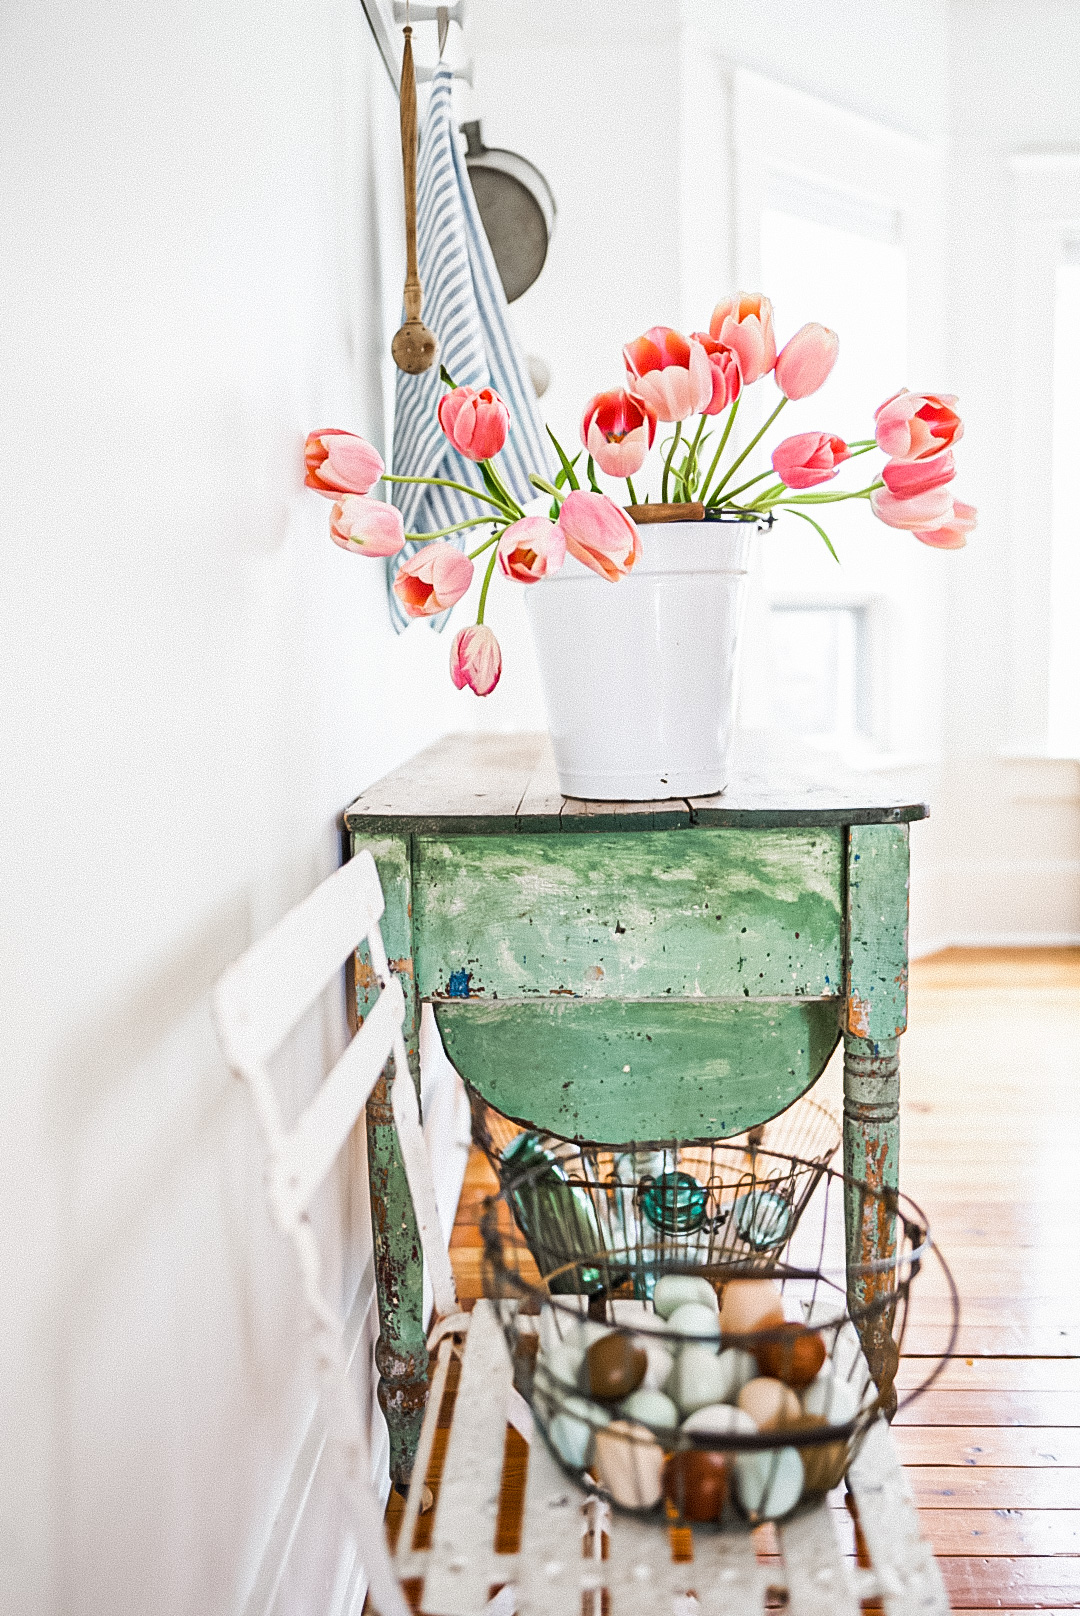 How to use antiques and heirloom pieces in your home decor